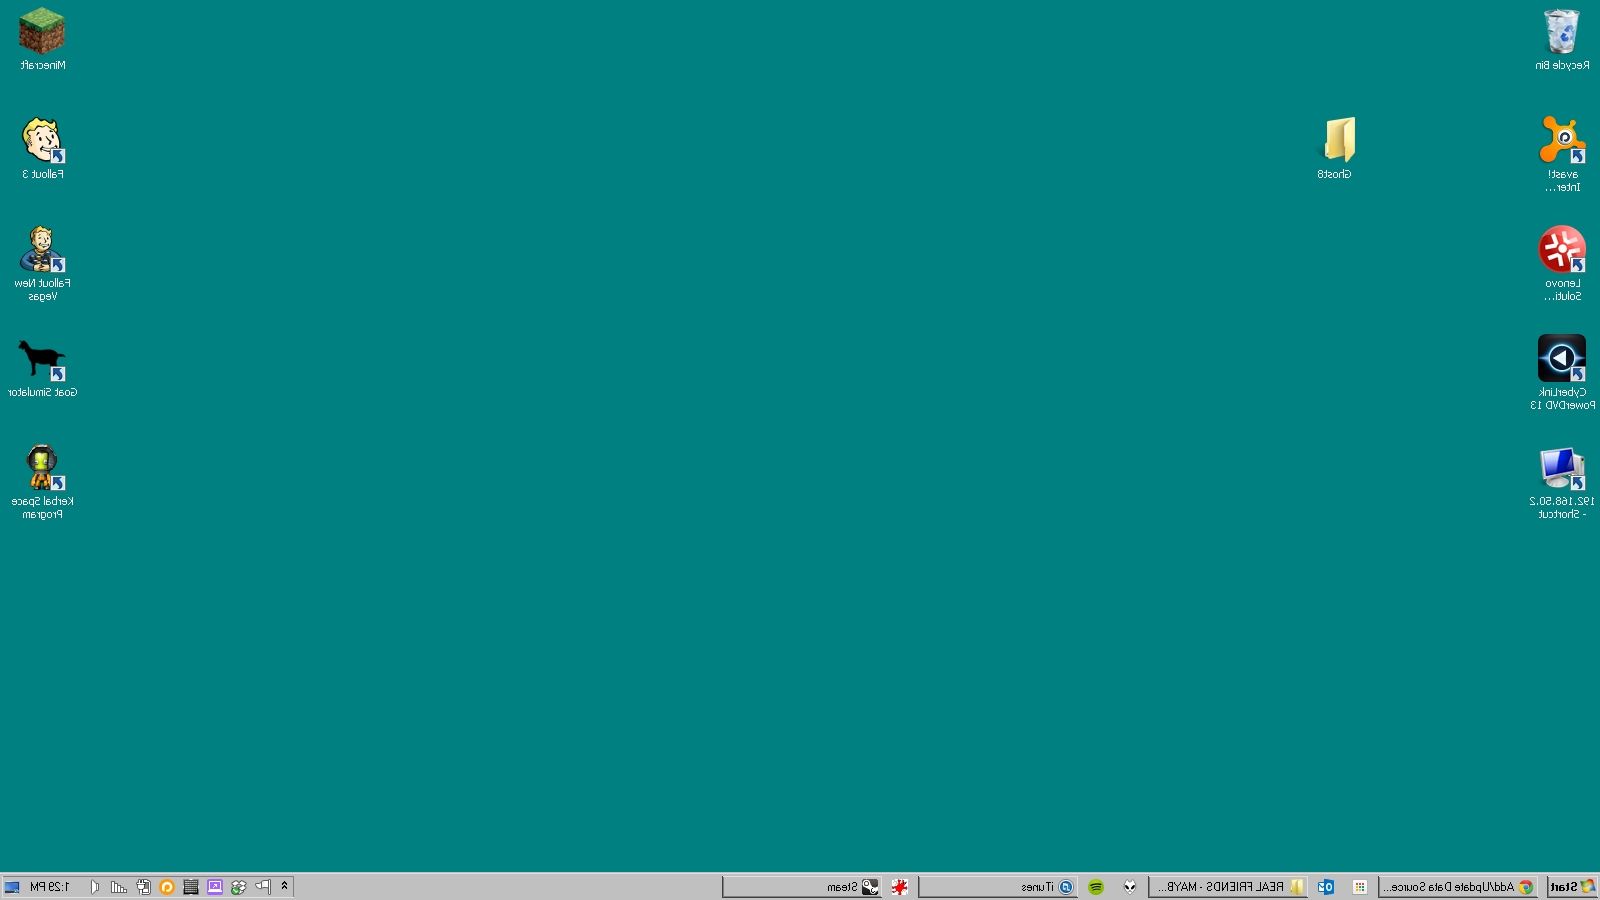 A desktop screen with various icons and tools - Windows 95, Windows 98